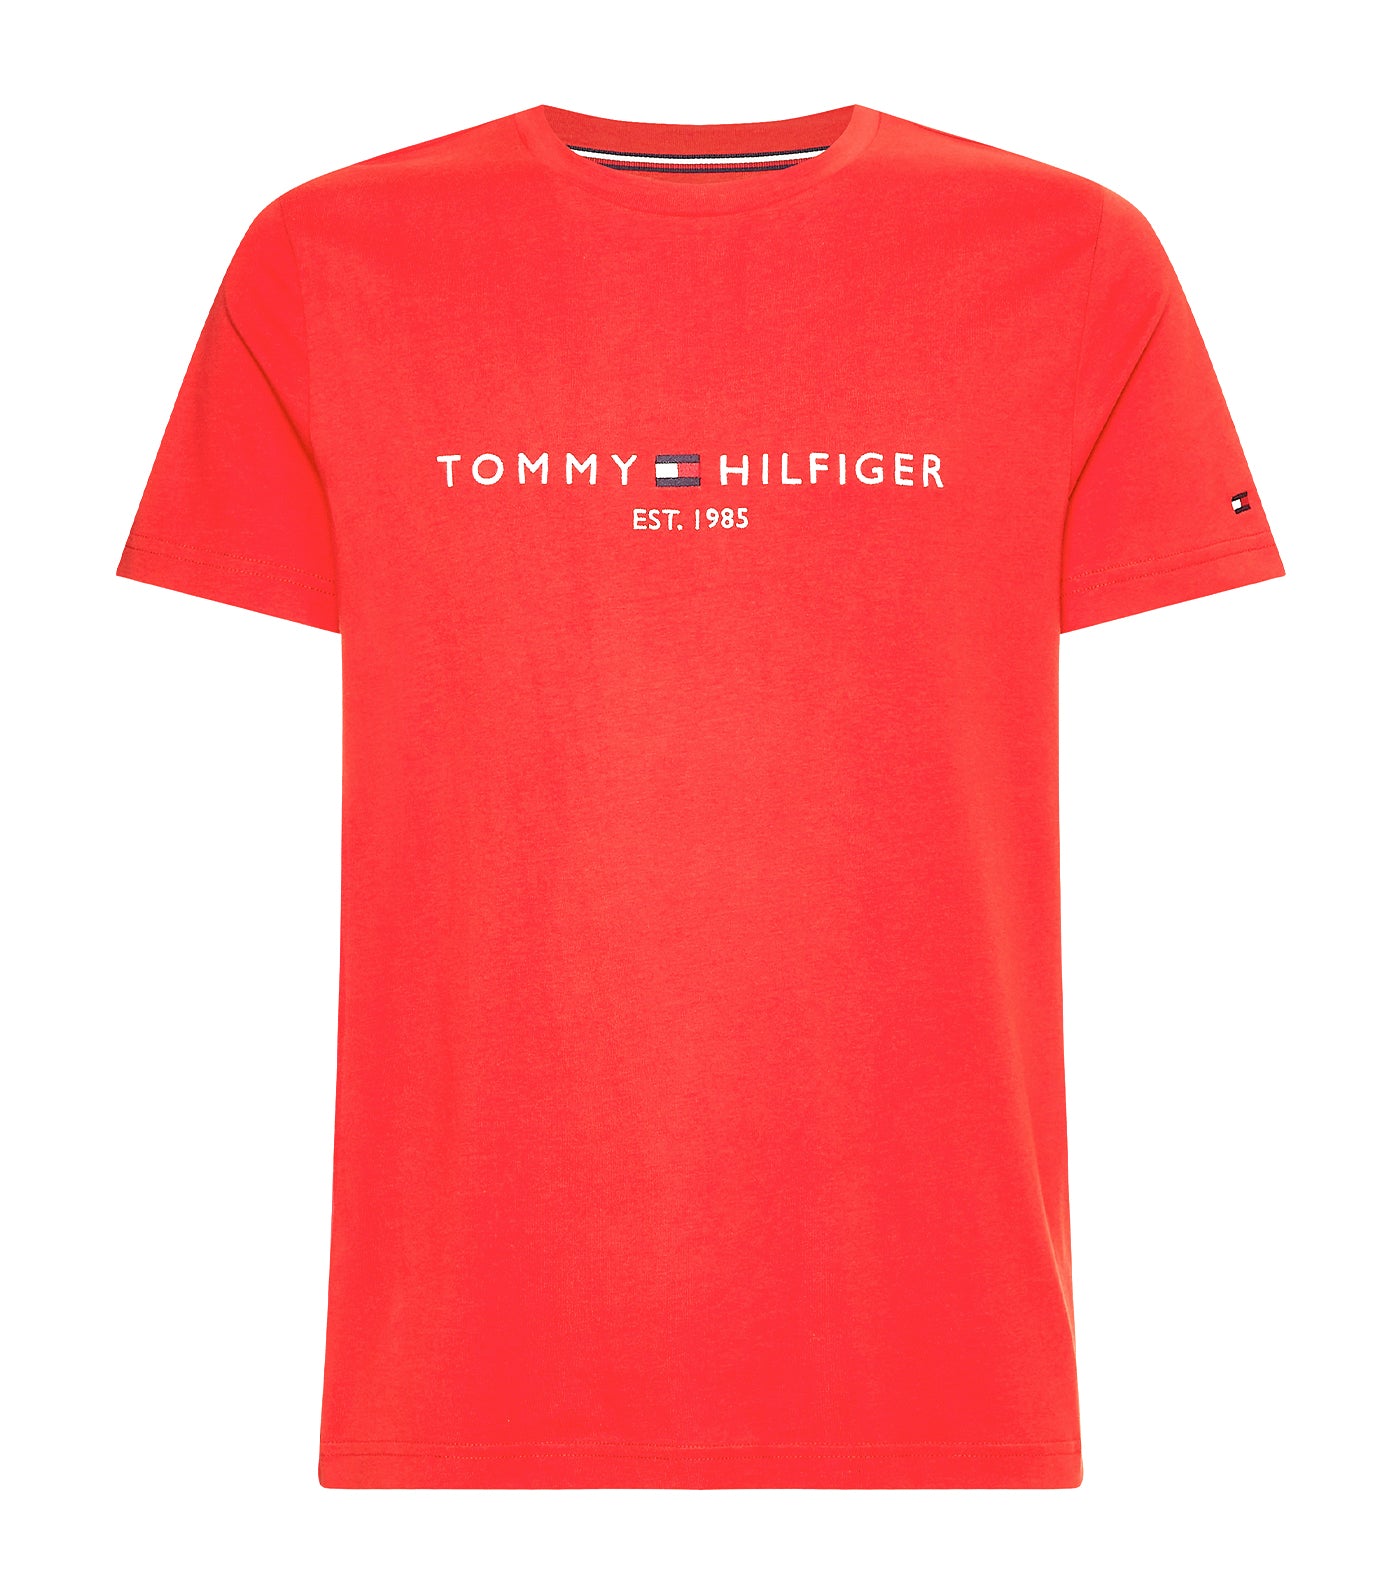 Tommy Hilfiger Men's Logo Tee Primary Red